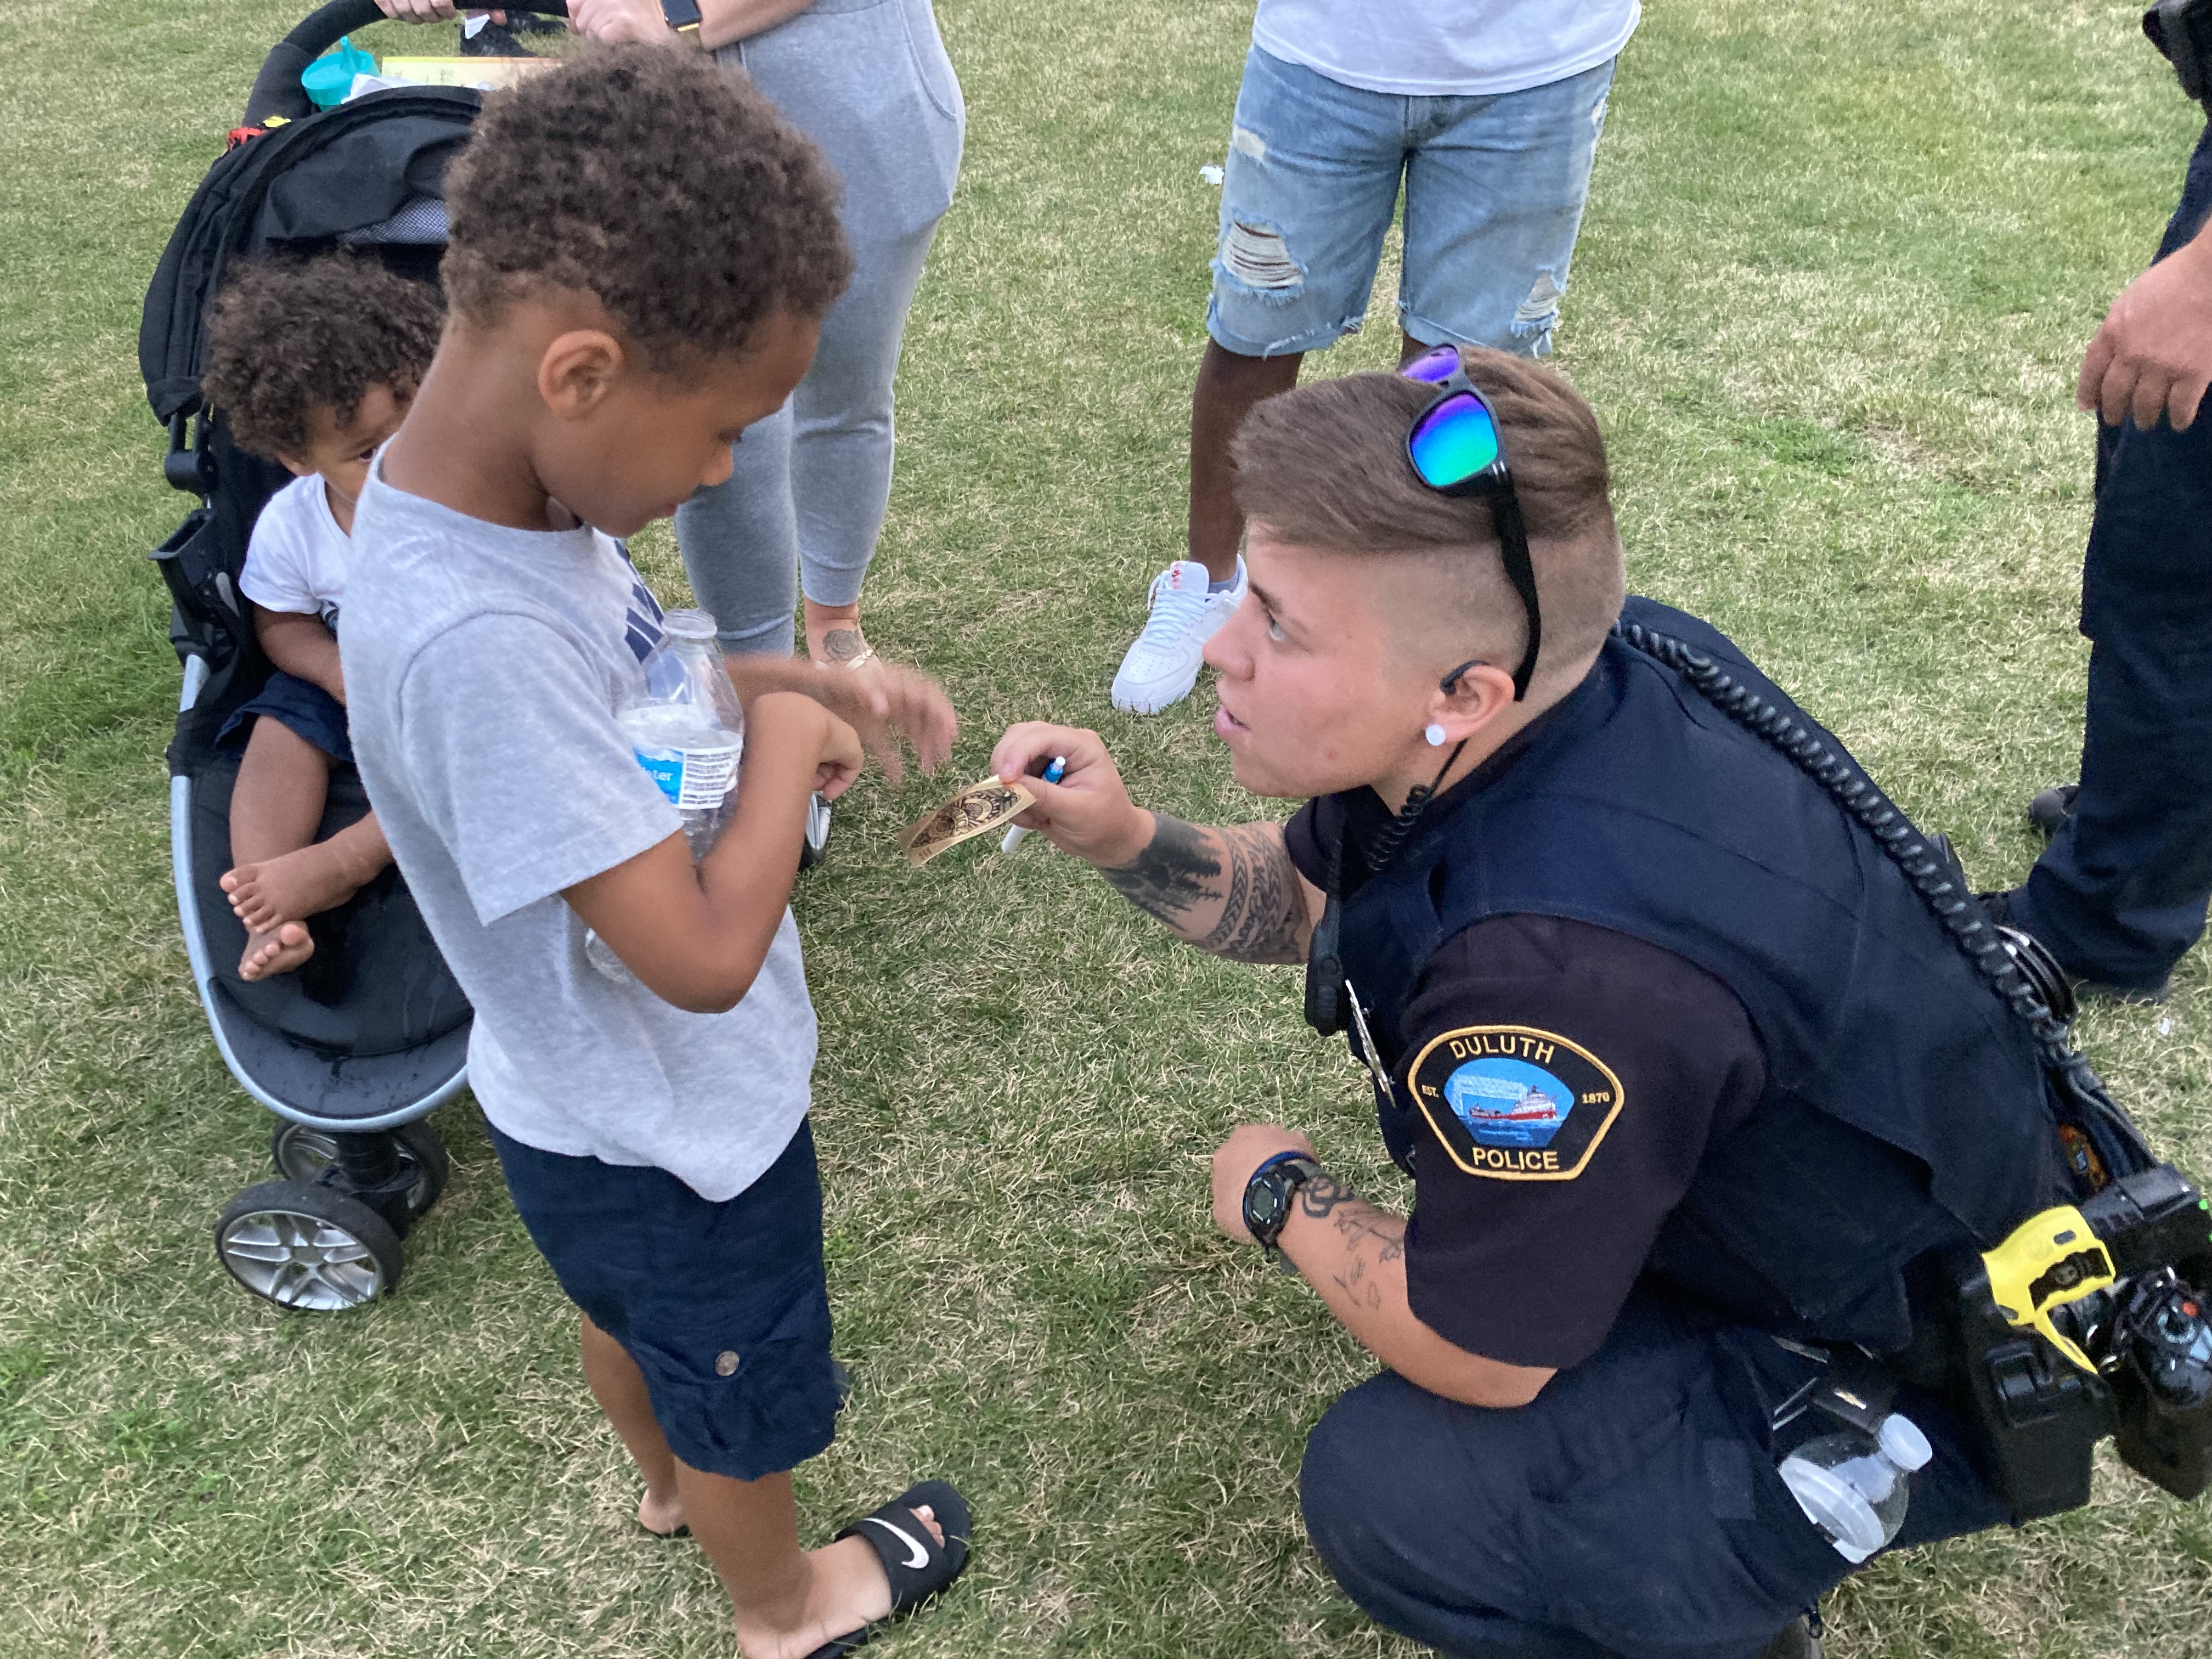 Officer Kaylee McMillen interacts with a child in our community by handing him a 'Junior Officer' sticker.